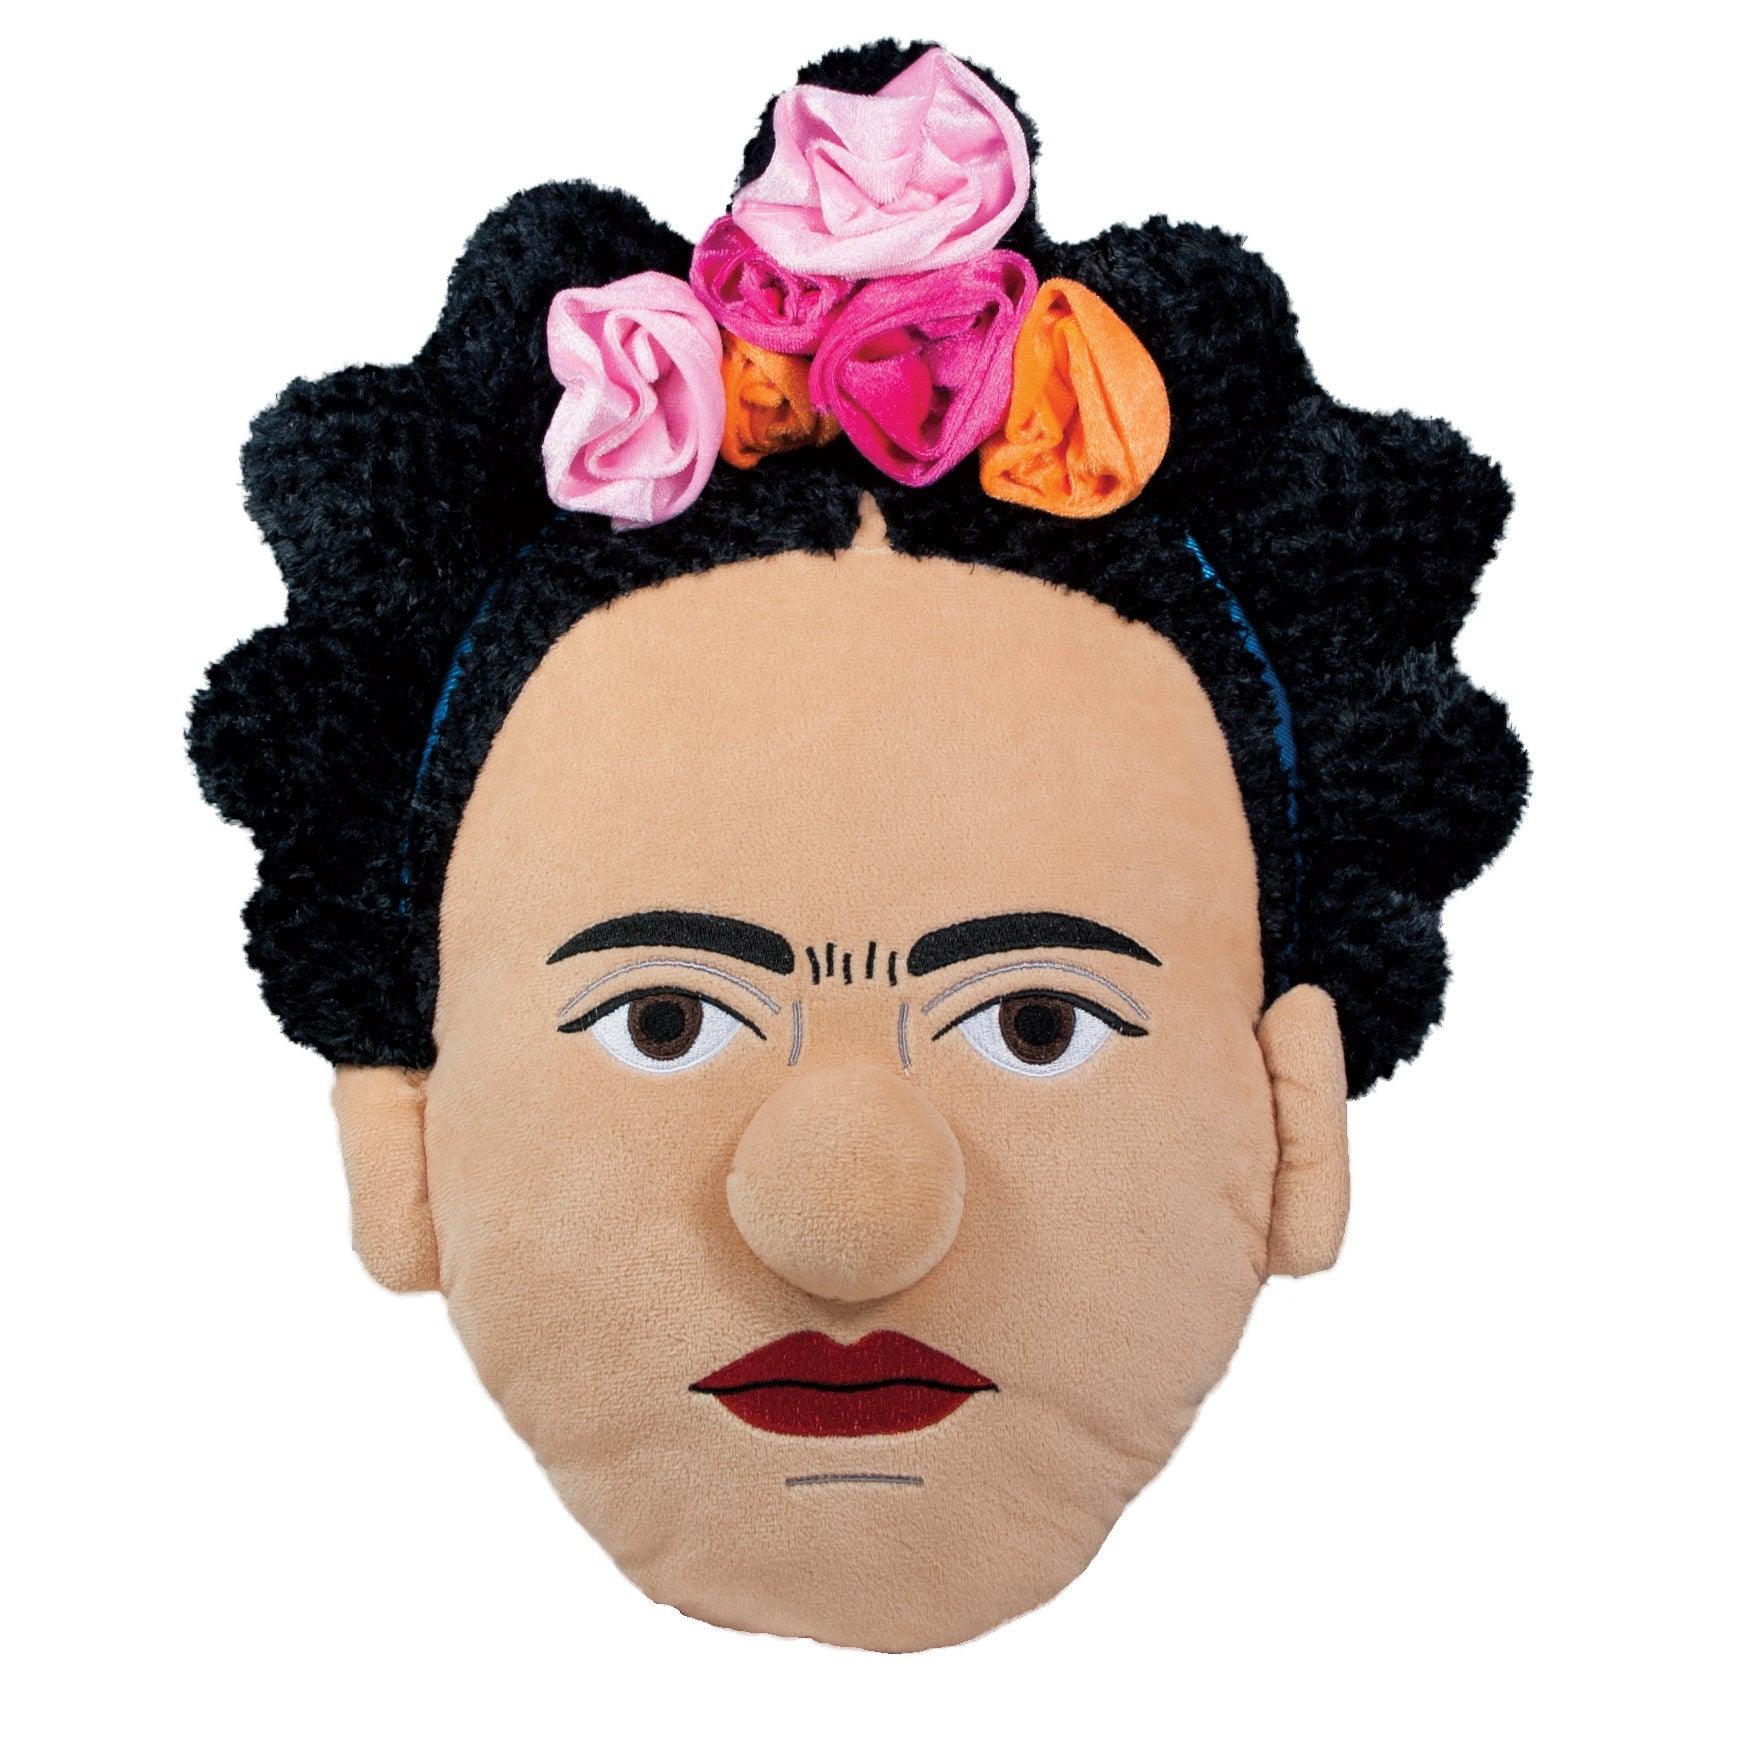 Product photo of Frida Kahlo Stuffed Portrait, a novelty gift manufactured by The Unemployed Philosophers Guild.